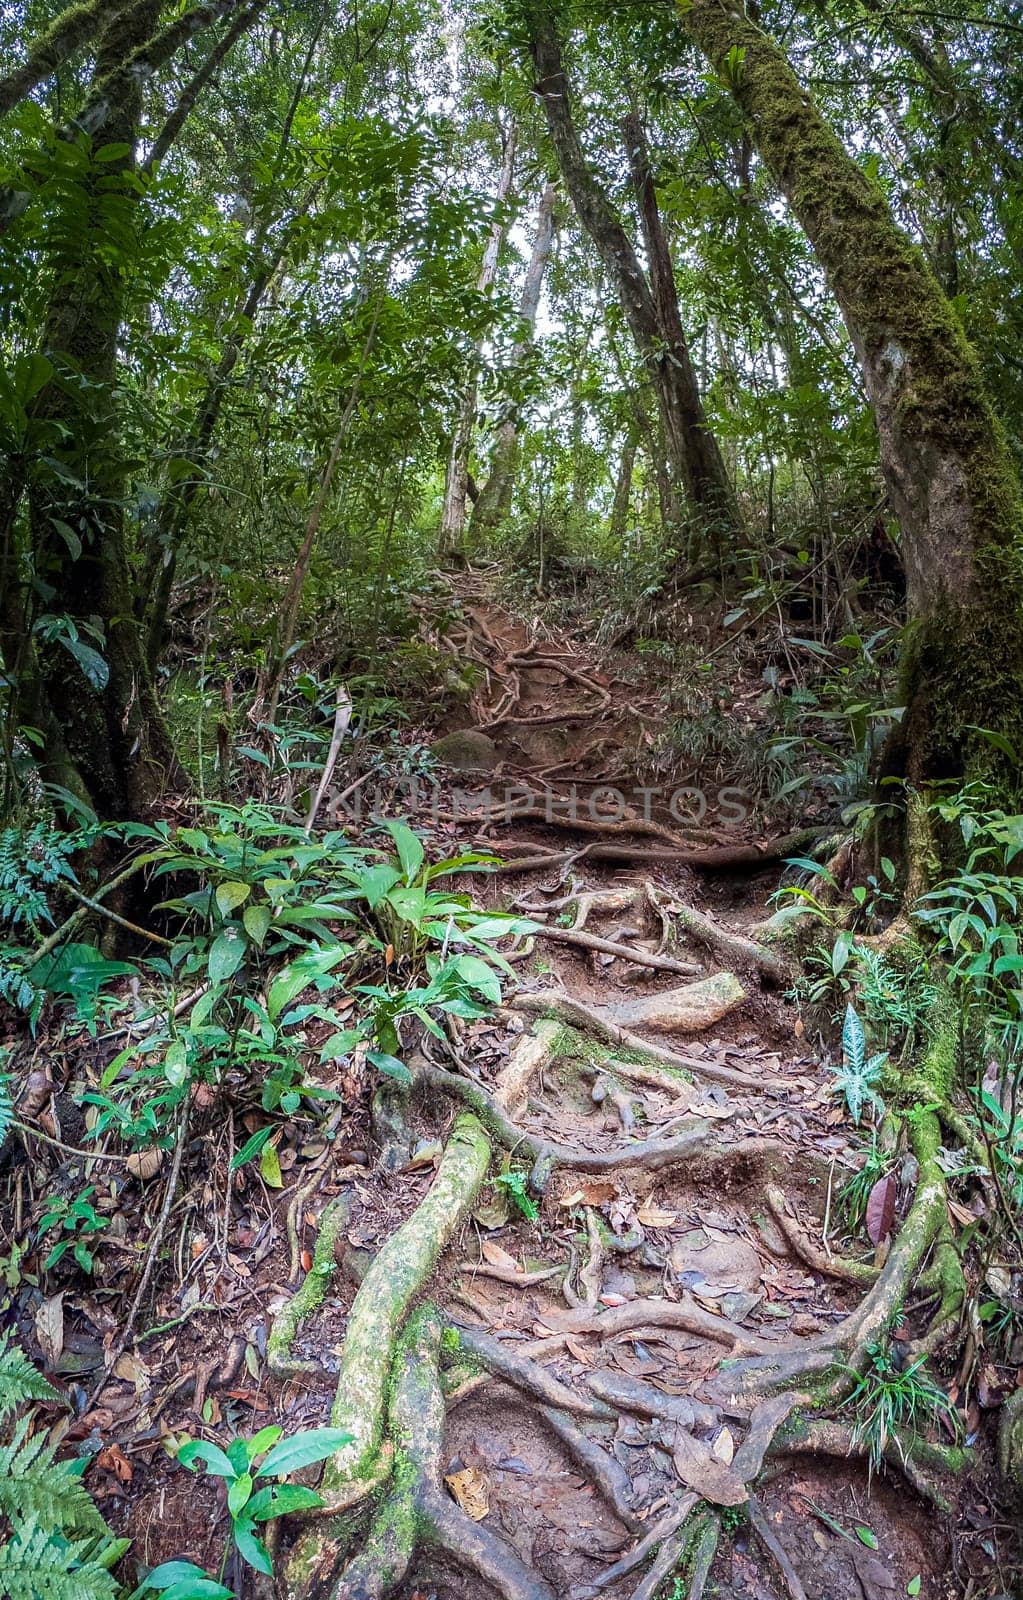 An untamed jungle path, lined with intricate tree roots and lush green vegetation.